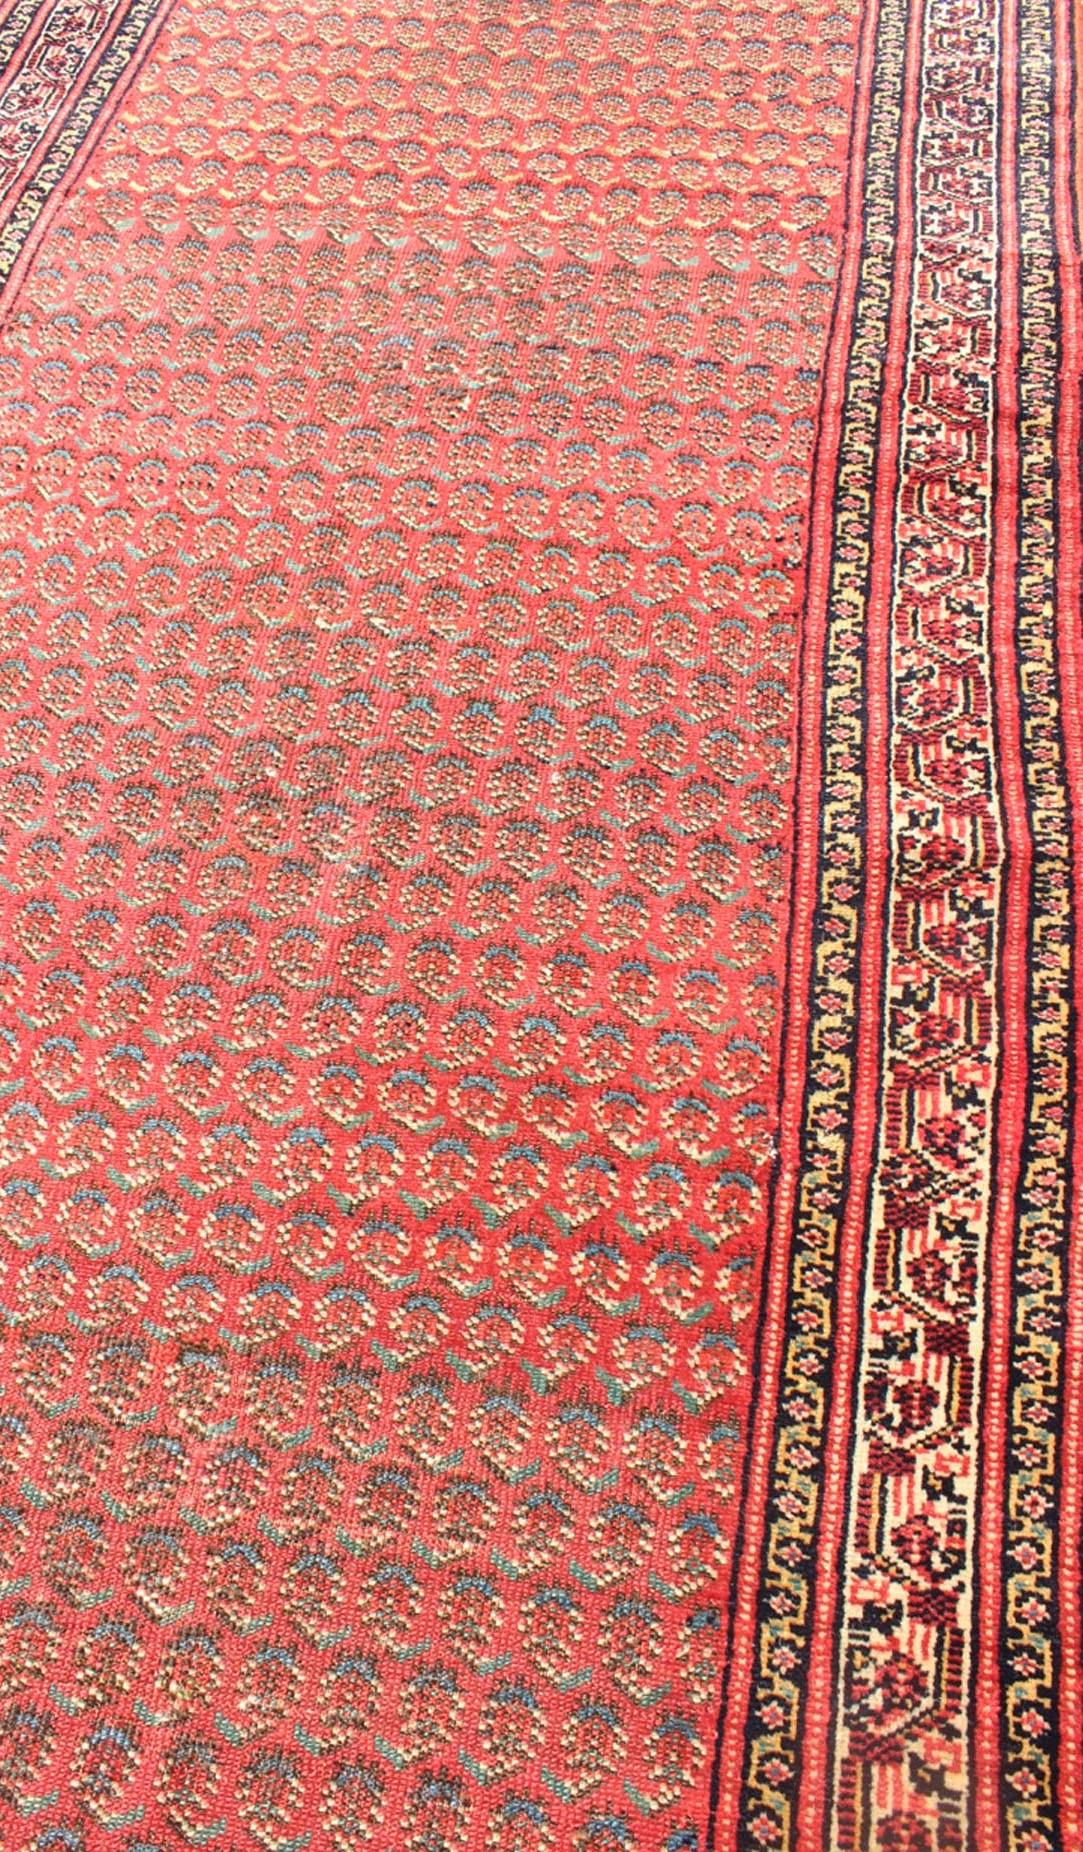 Wool Long Runner Antique Persian Malayer Runner with Saraband Design in Soft Red  For Sale